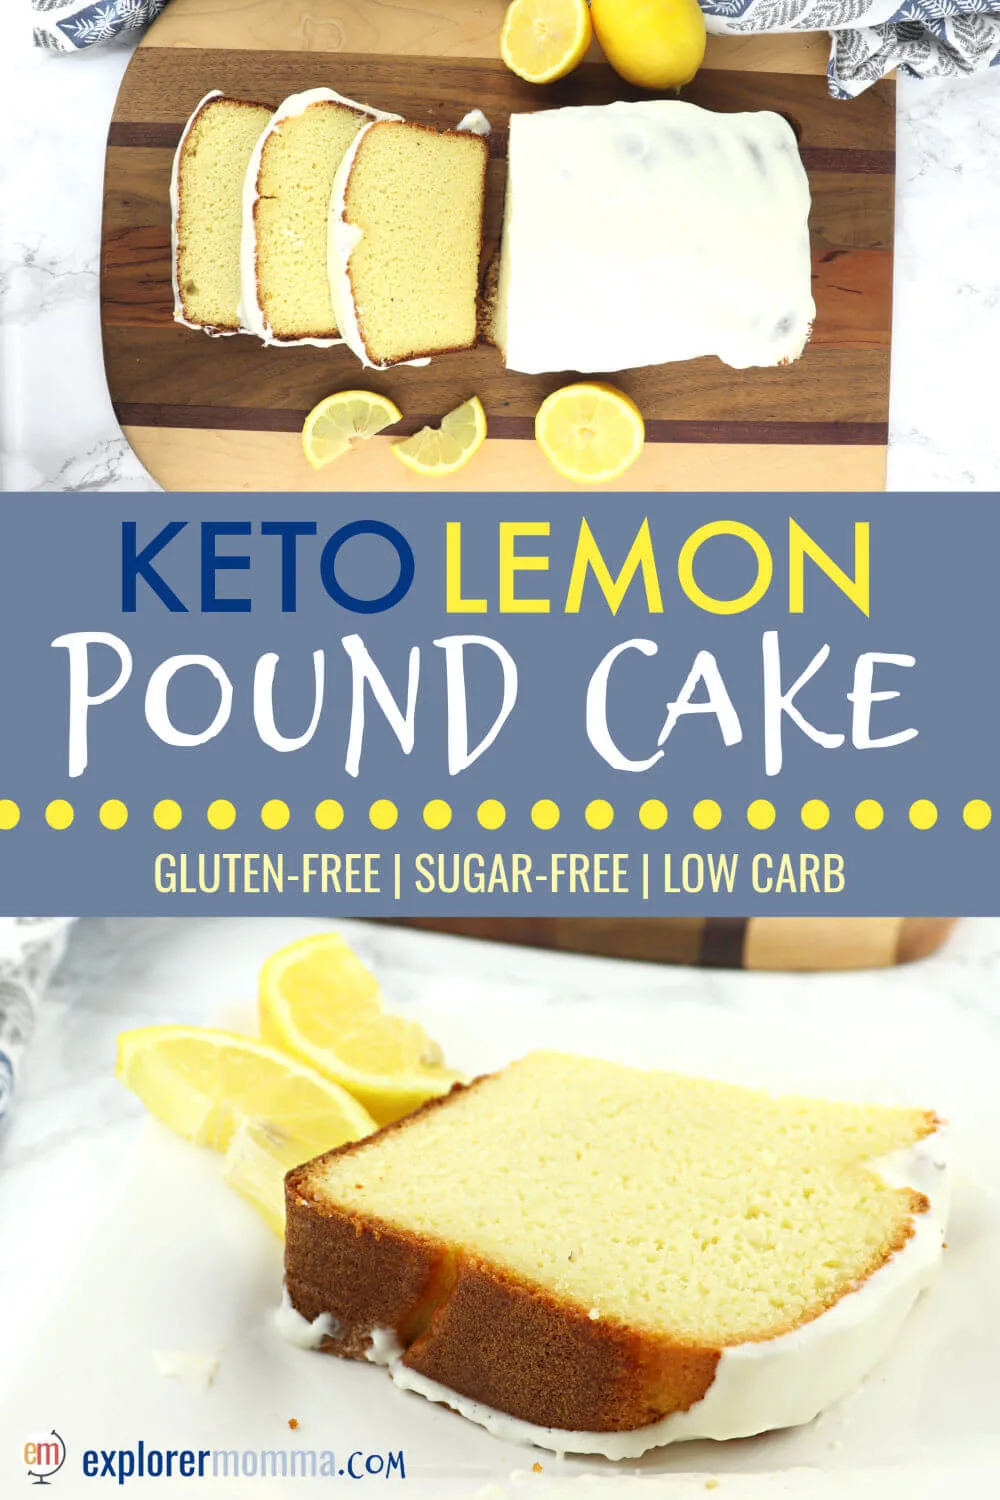 Delicious lemon keto pound cake recipe. It's fabulous for a gluten-free tea time, to replace your favorite coffee shop snack, or sugar-free breakfast. Did I mention it's also packed with 9 grams of protein? #ketobreakfast #ketorecipes #lowcarbrecipesketo